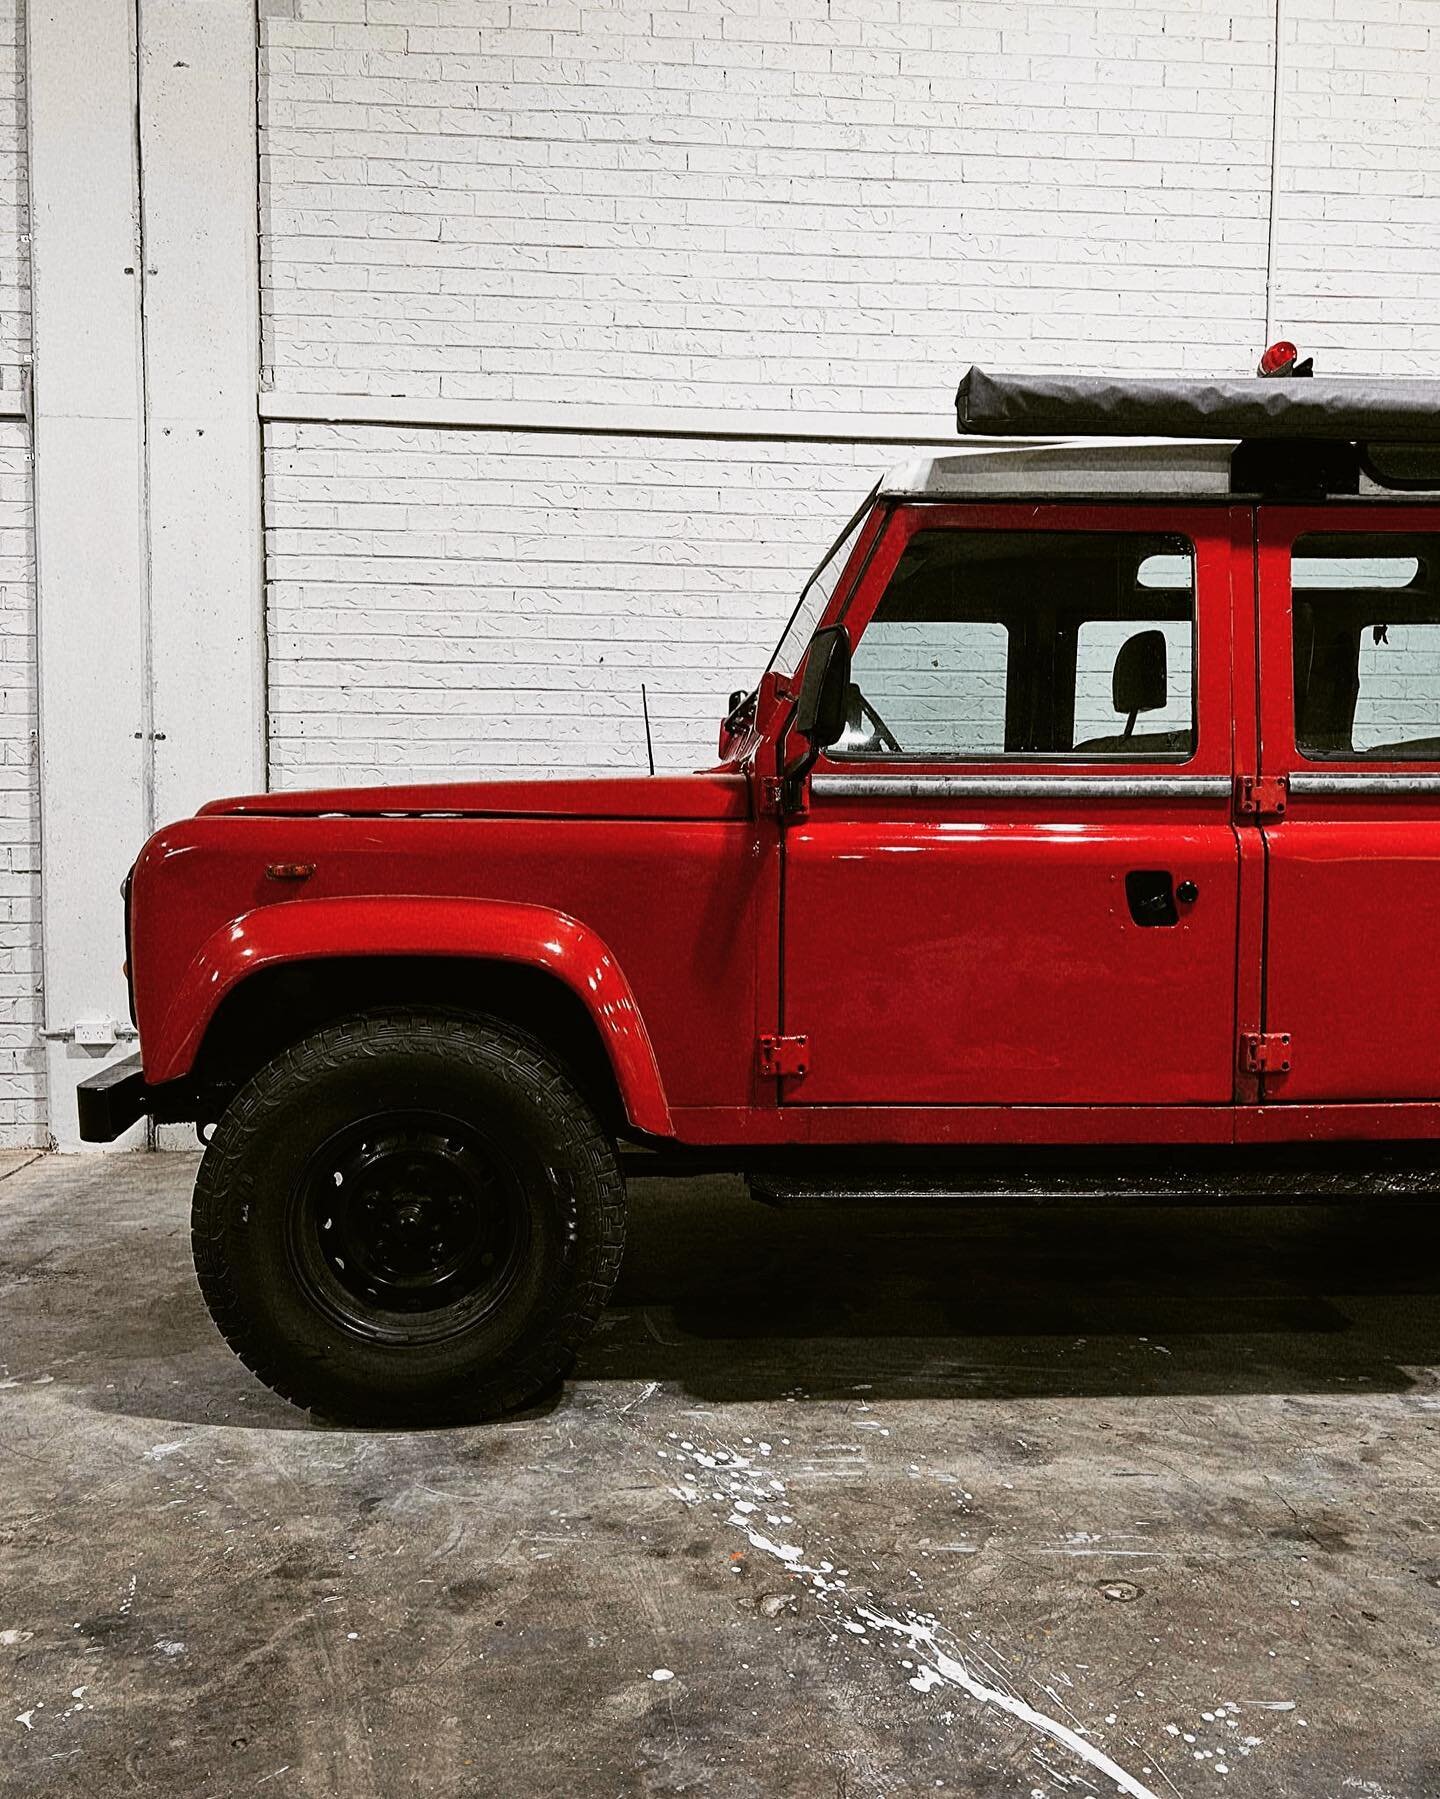 Big Red really buffed up. It&rsquo;s crazy how well the original acrylic paint came up with a little cut &amp; polish
.
.
📸 @crossmedia_group 
.
.
.
#charmer #charmedyourwayintoourhearts #stopit #defender #county #landrovercounty #landrover110